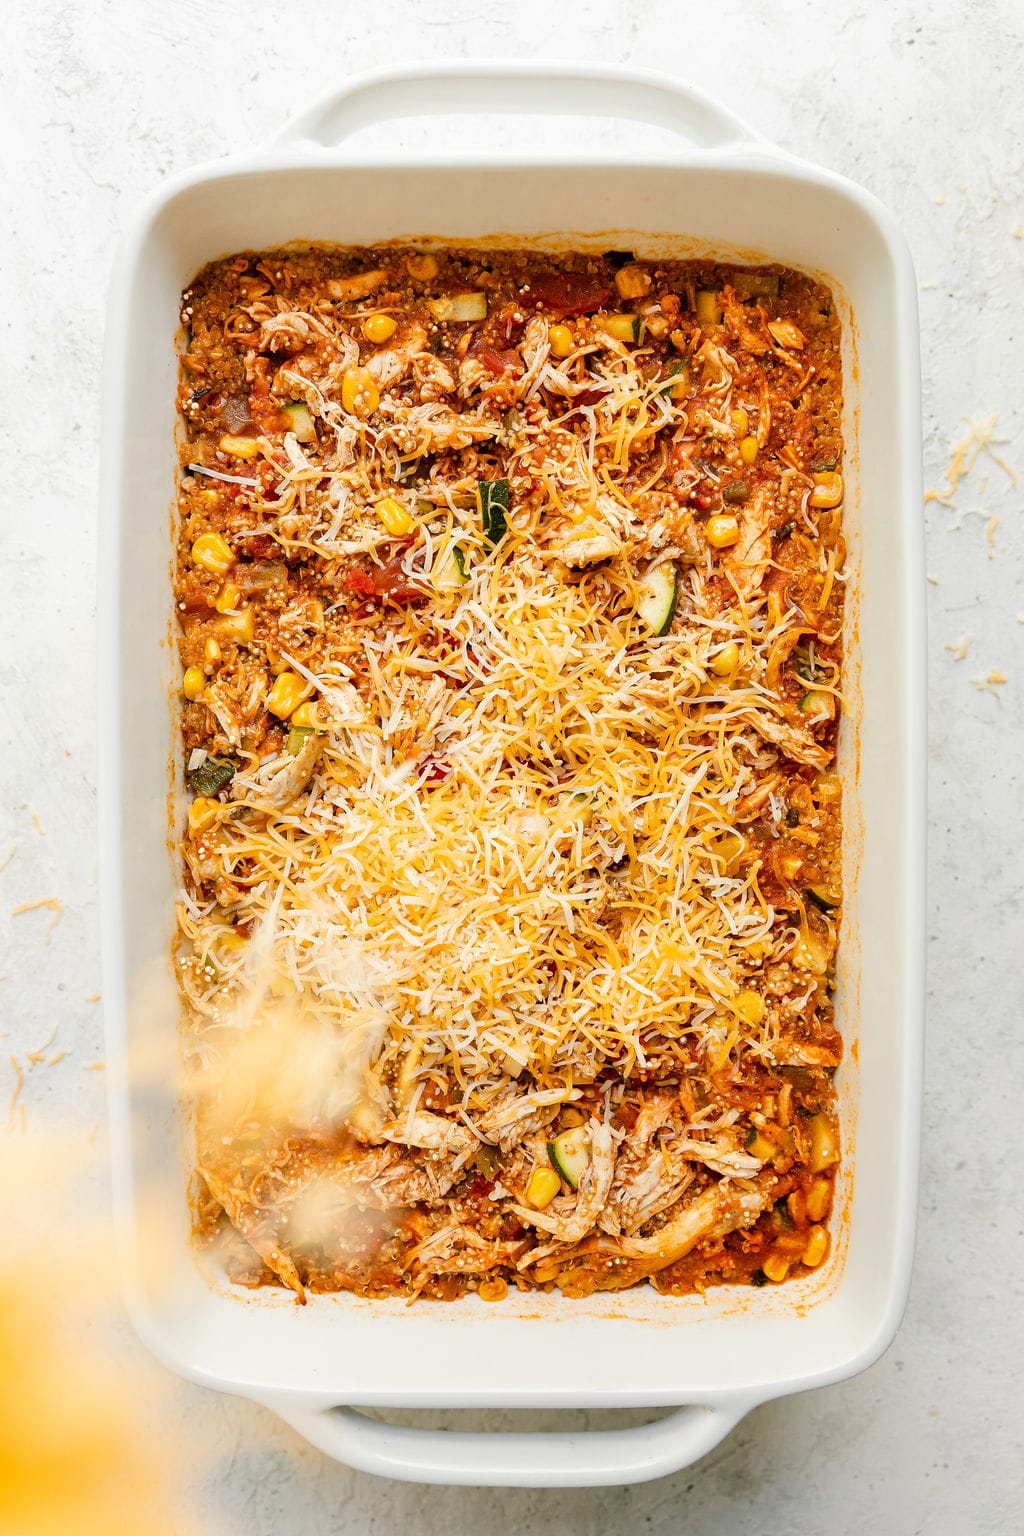 Chipotle quinoa casserole with chicken in a white baking dish with cheddar cheese being sprinkled on top.